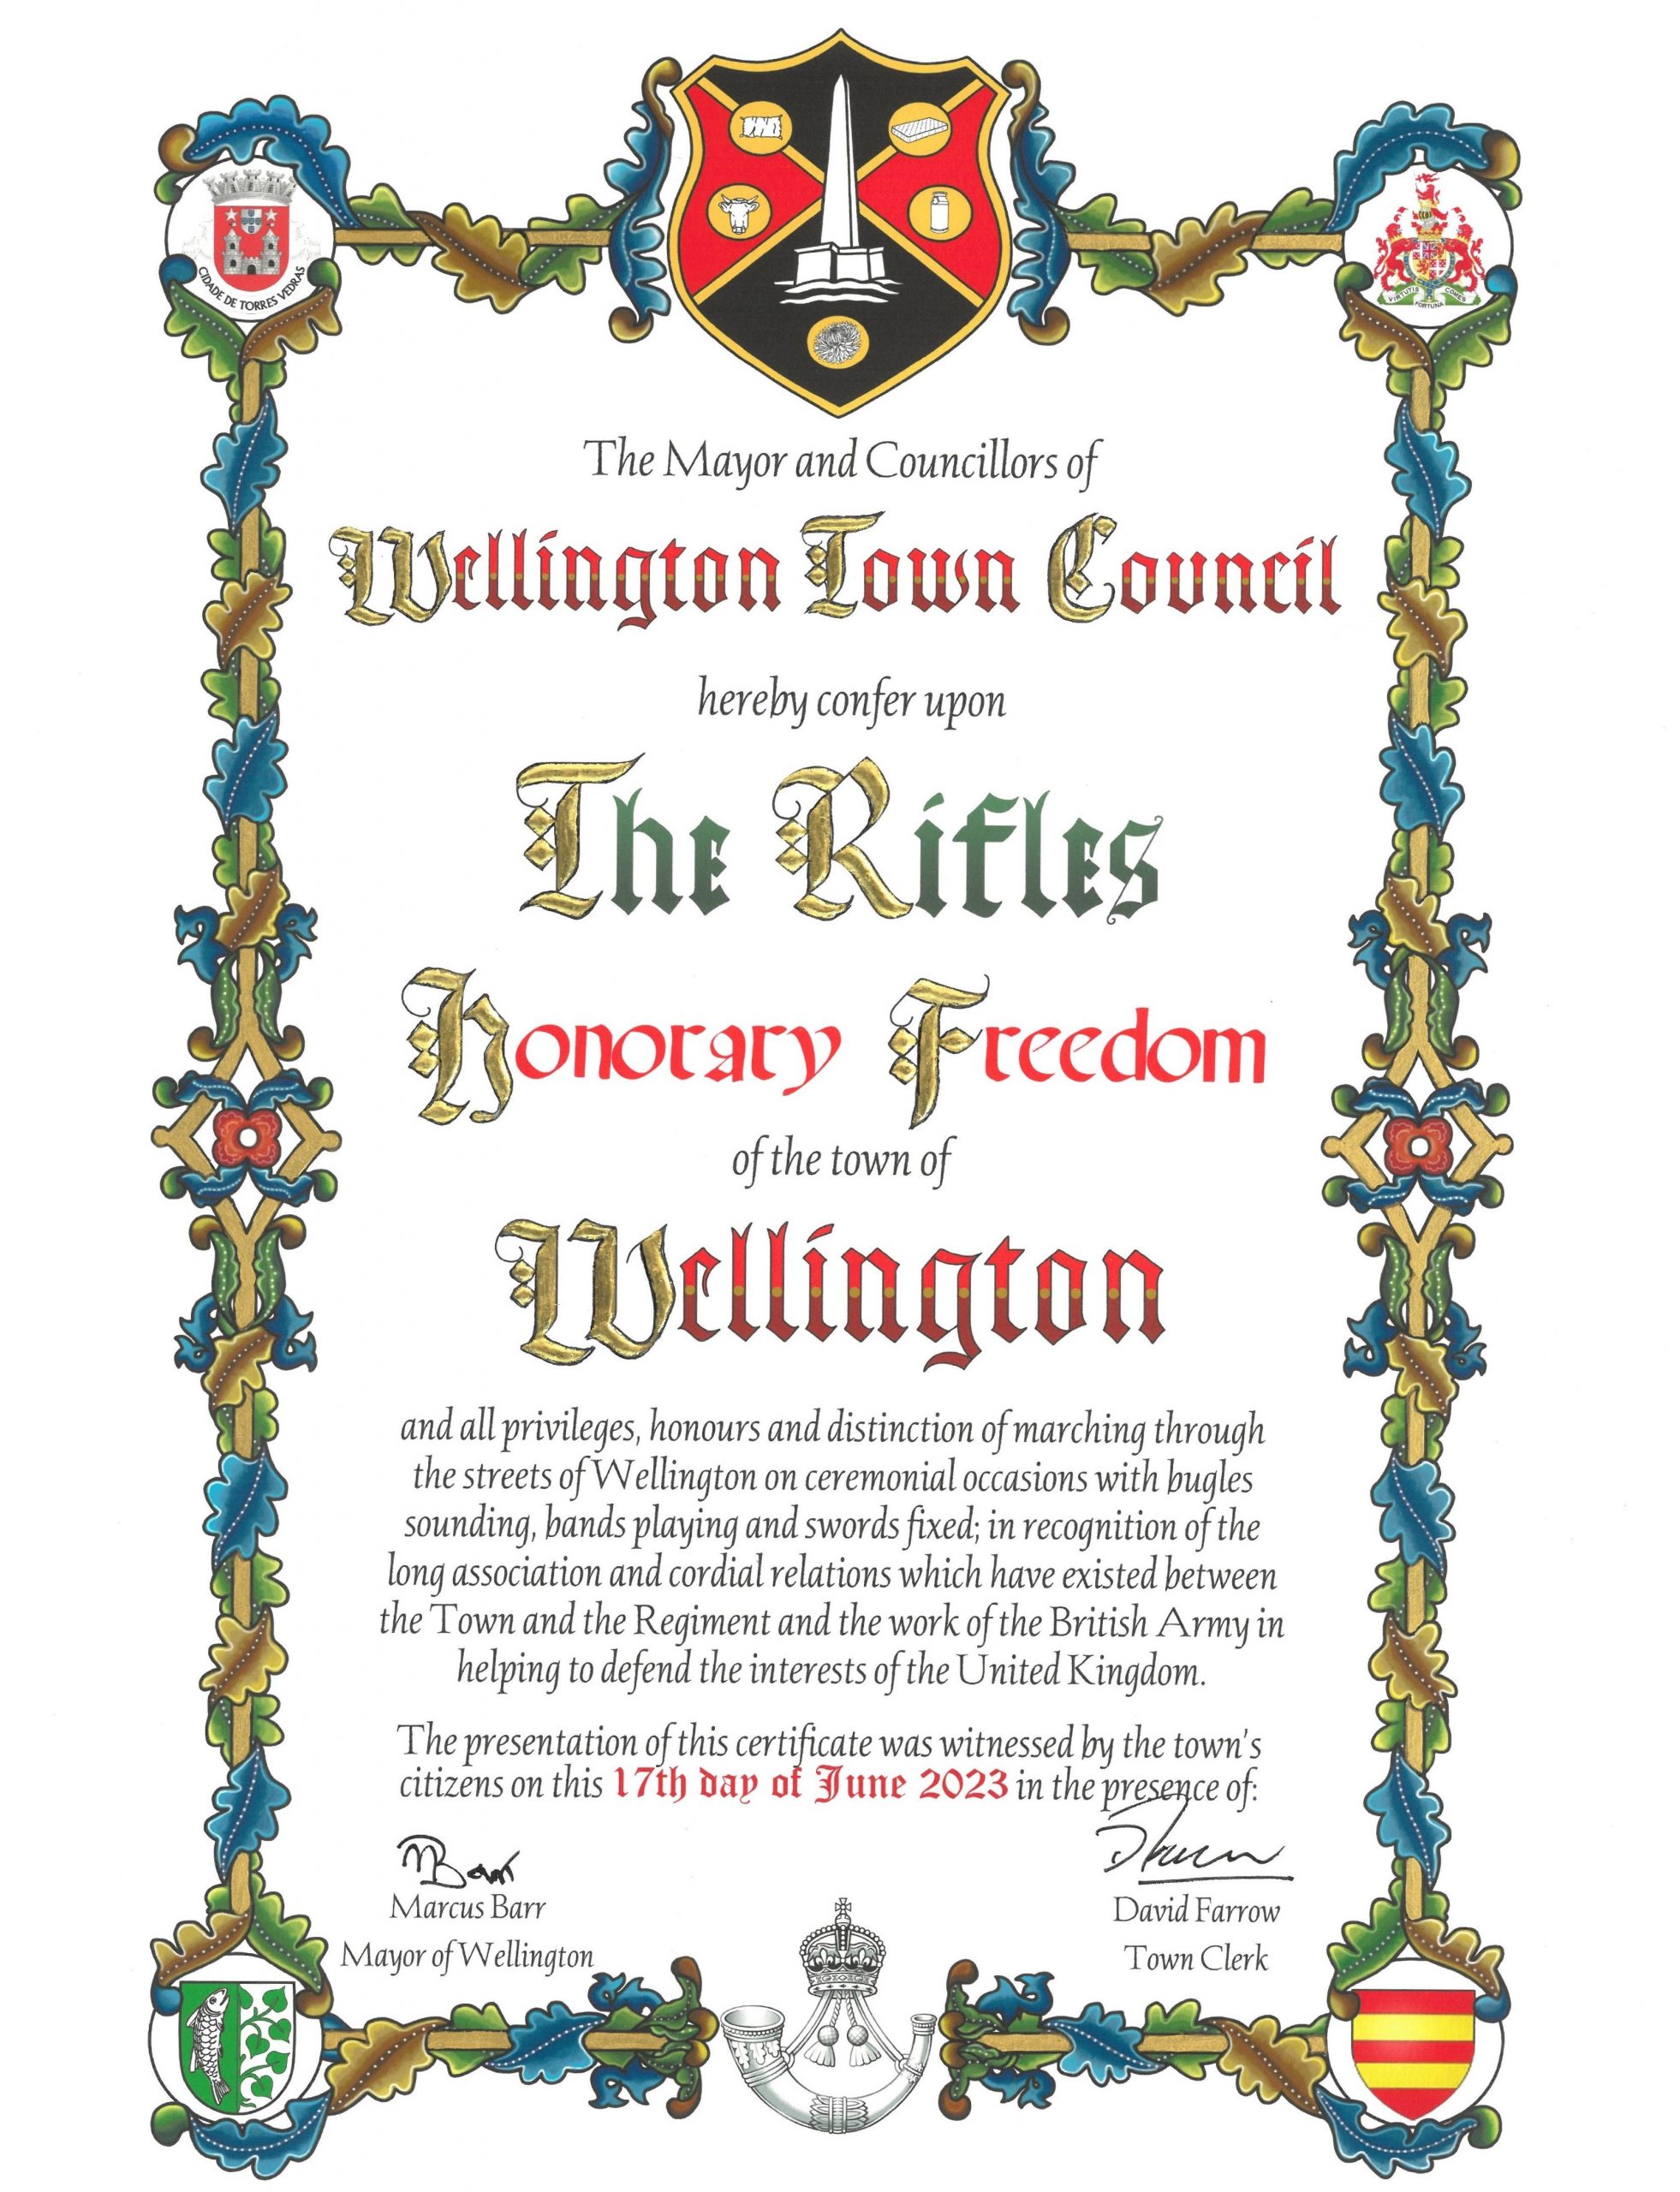 The Mayor and Councillors of Wellington Town Council hereby confer upon The Rifles honorary freedom of the town of Wellington and all privileges, honours and distinction of marching through the streets of Wellington on ceremonial occasions with bugles sounding, bands playing and swords fixed; in recognition of the long association and cordial relations which have existed between the Town and the Regiment and the work of the British Army in helping defend the interests of the United Kingdom. The presentation of this certificate was witnessed by the town's citizens on this 17th day of June 2023 in the presence of: Marcus Barr, Mayor of Wellington. David Farrow, Town Clerk.